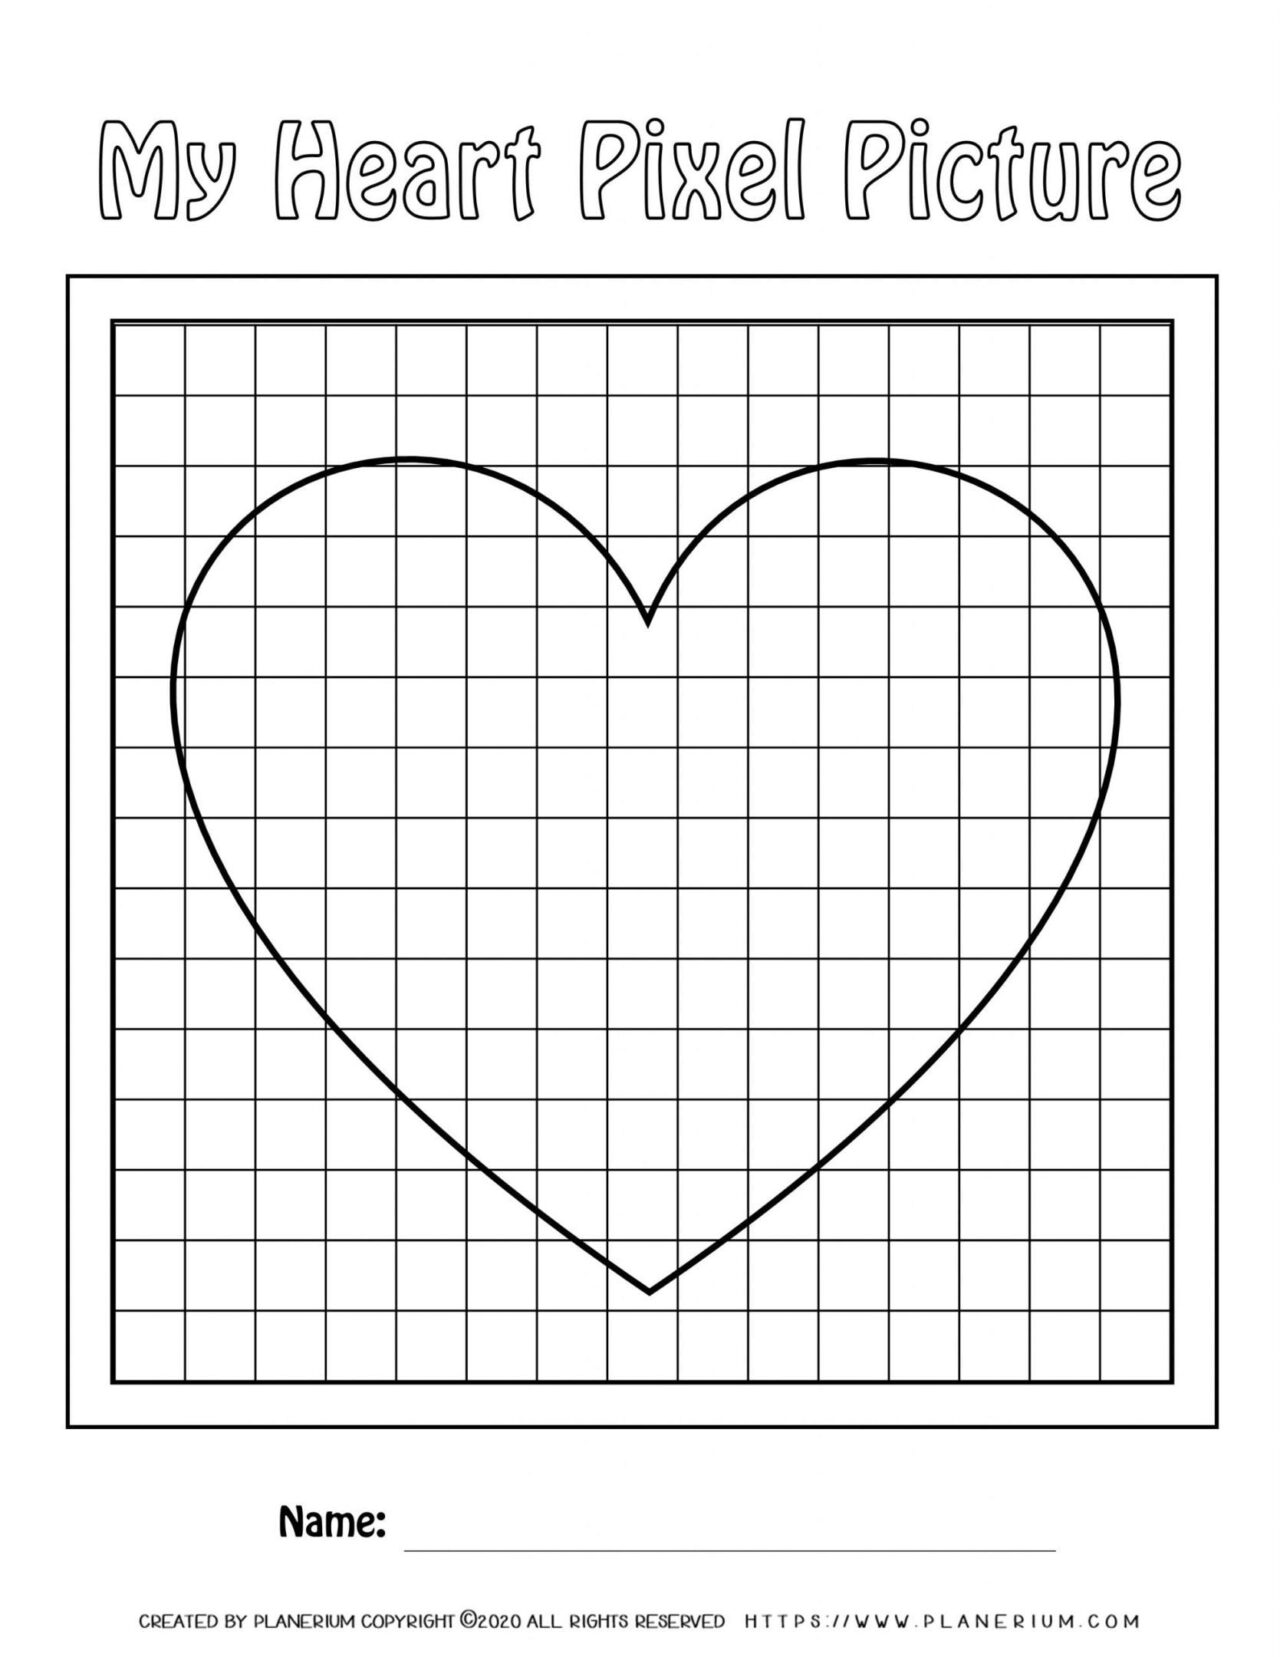 Valentines Day Worksheet - Big Heart on Small grid